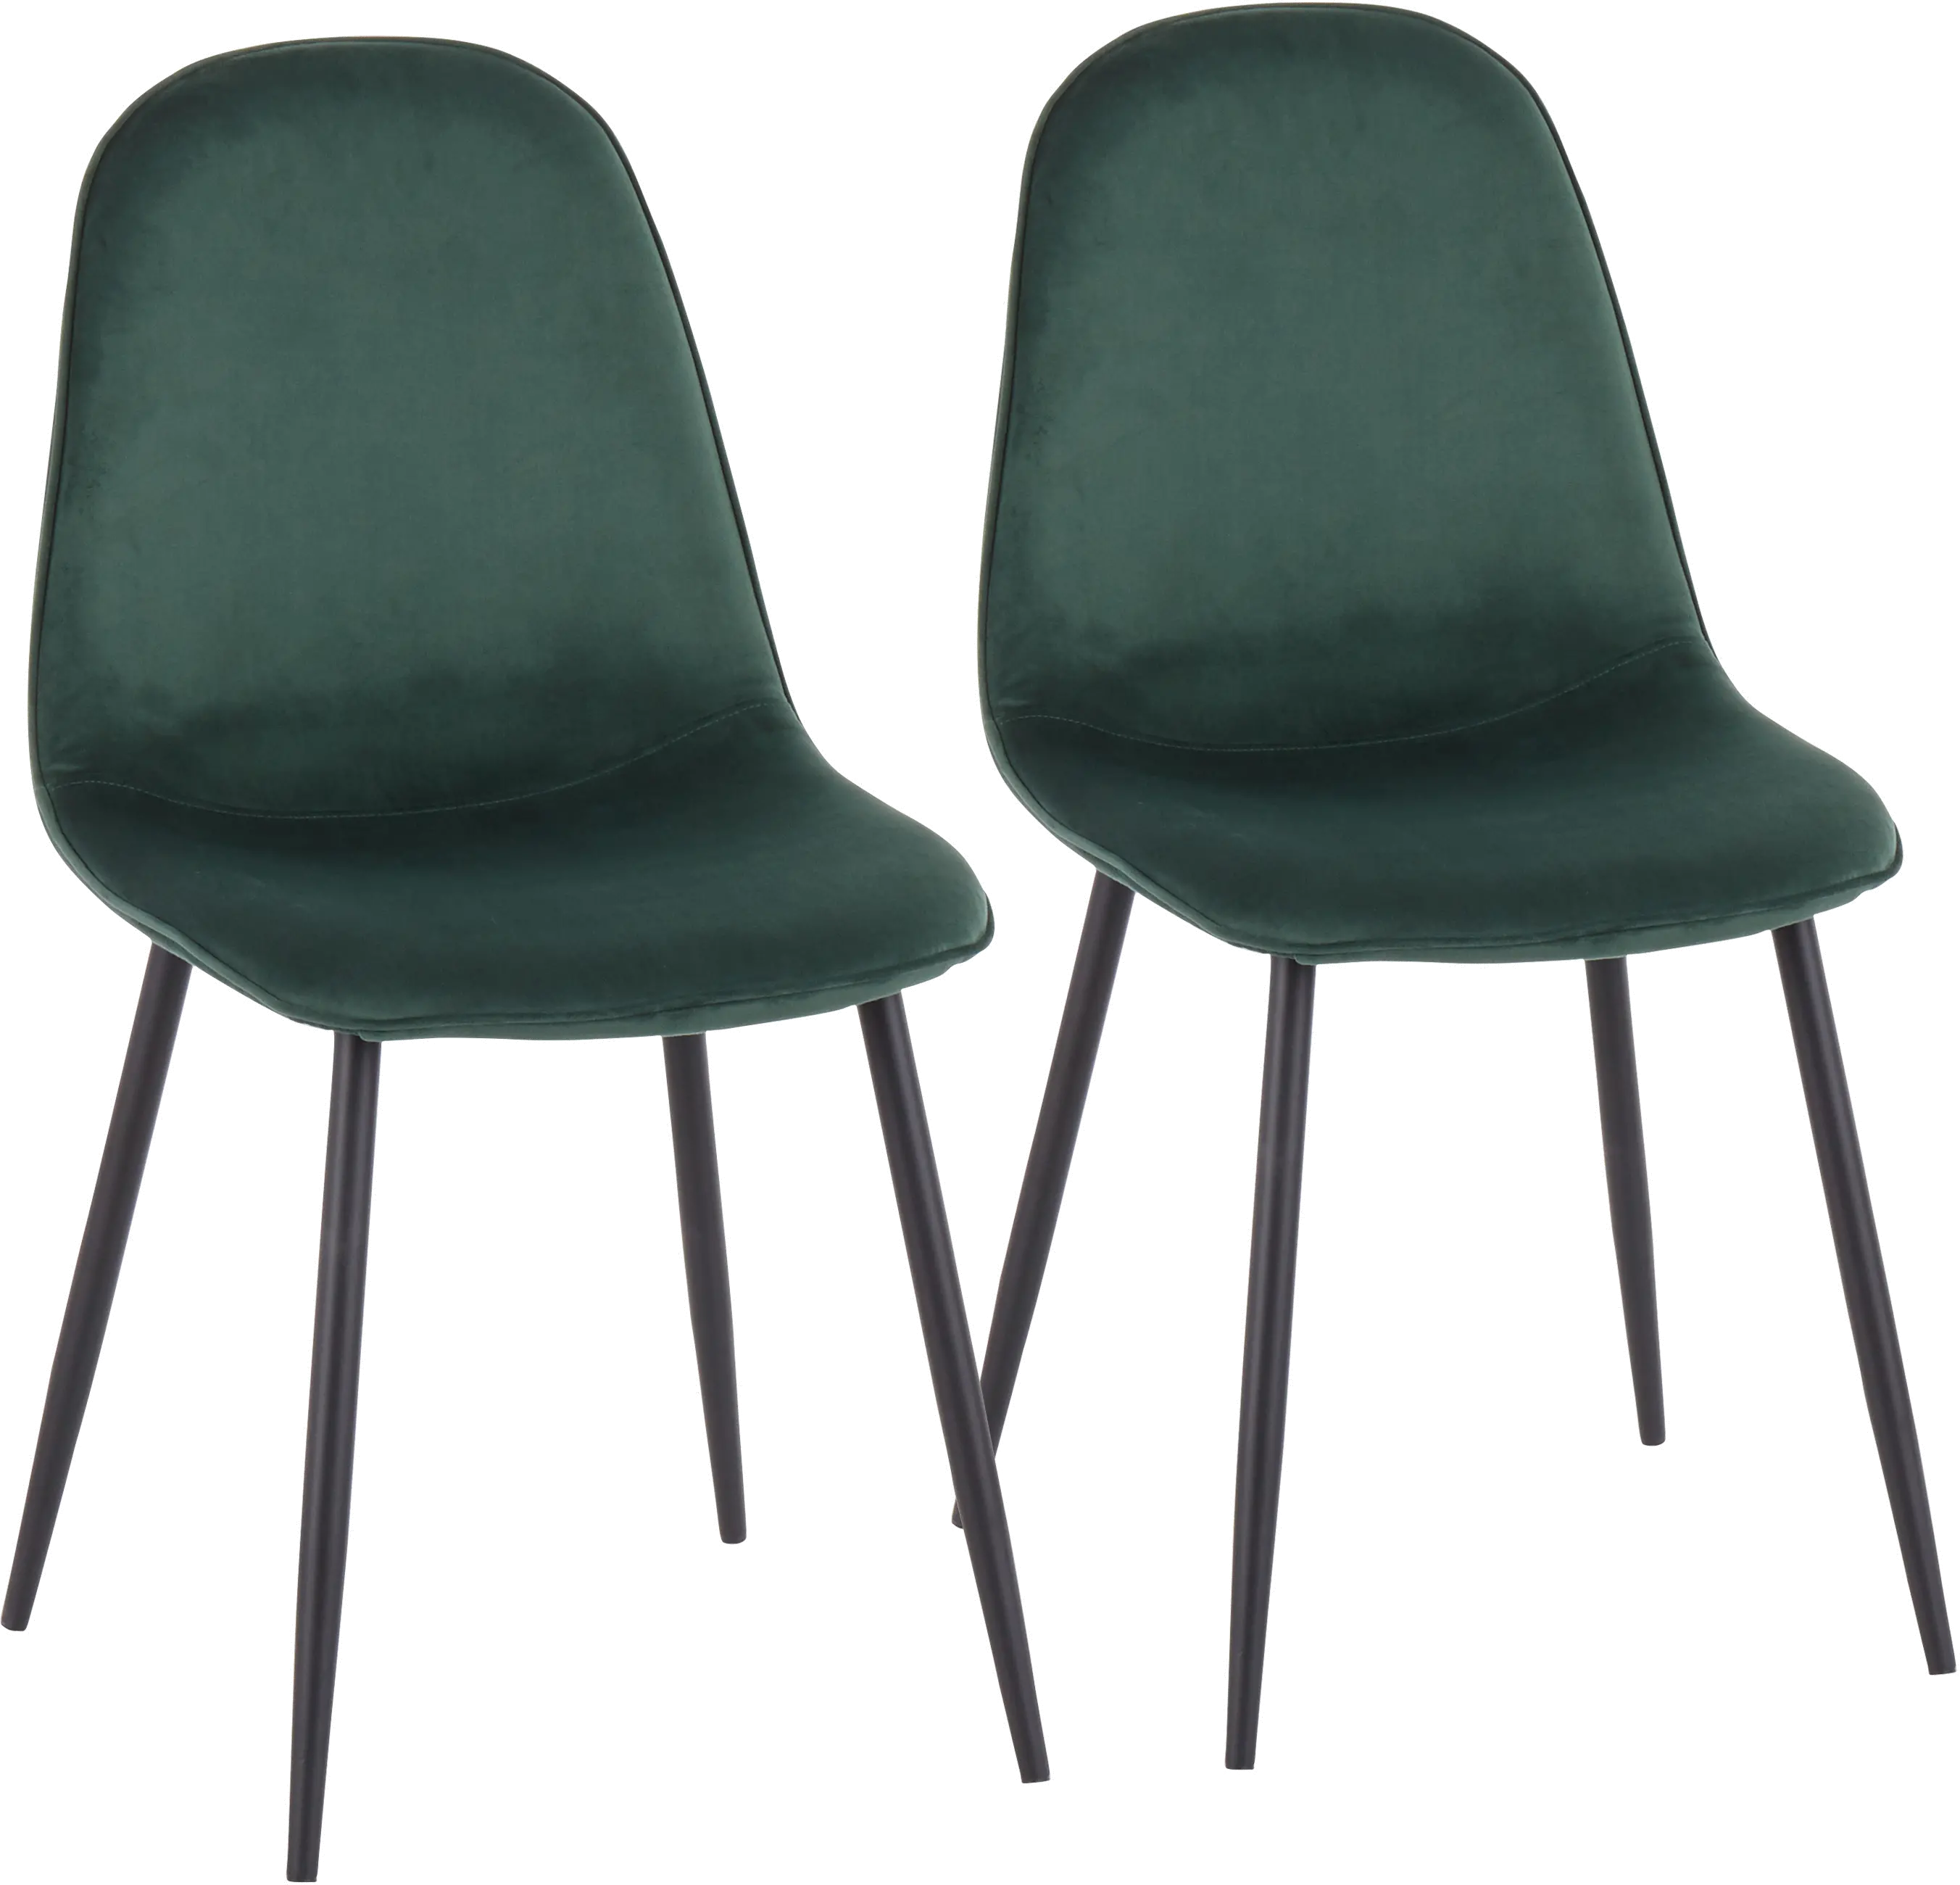 Pebble Green and Black Dining Room Chair (Set of 2)